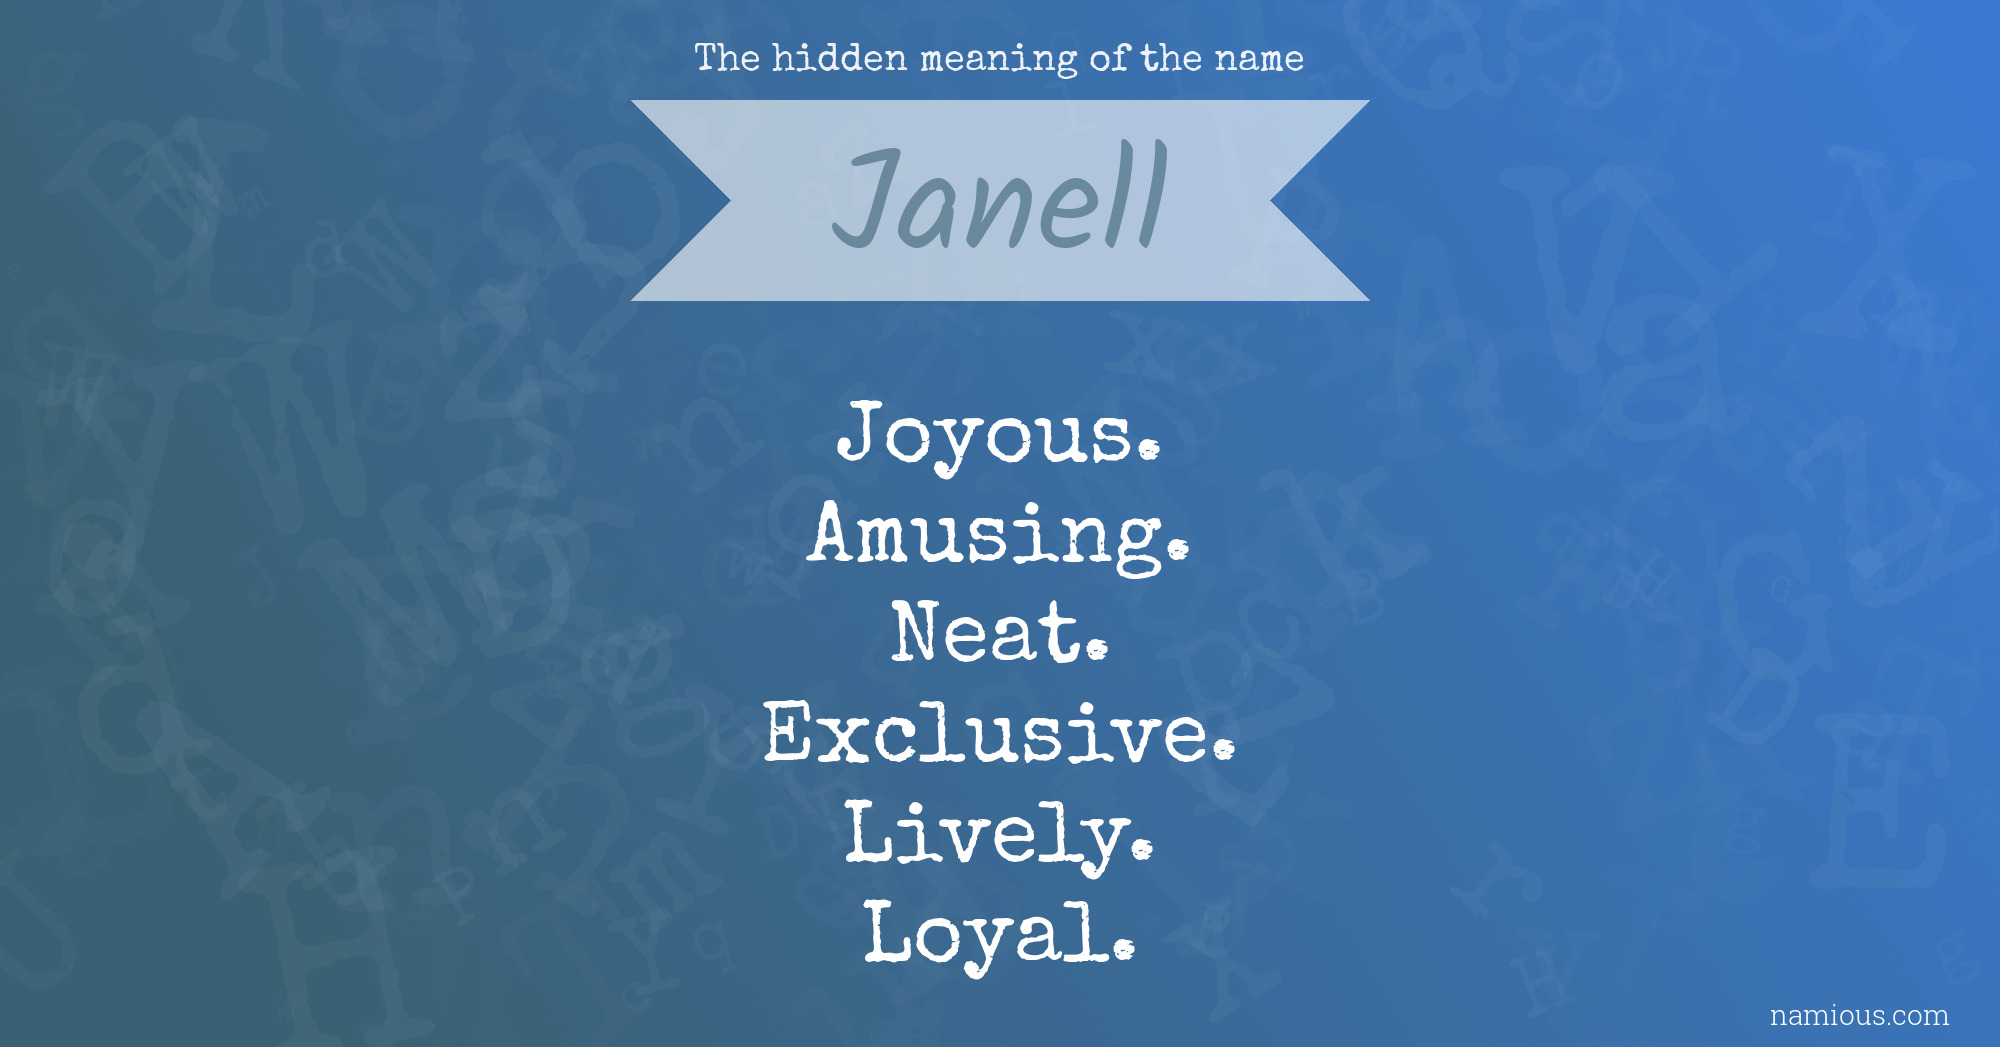 The hidden meaning of the name Janell